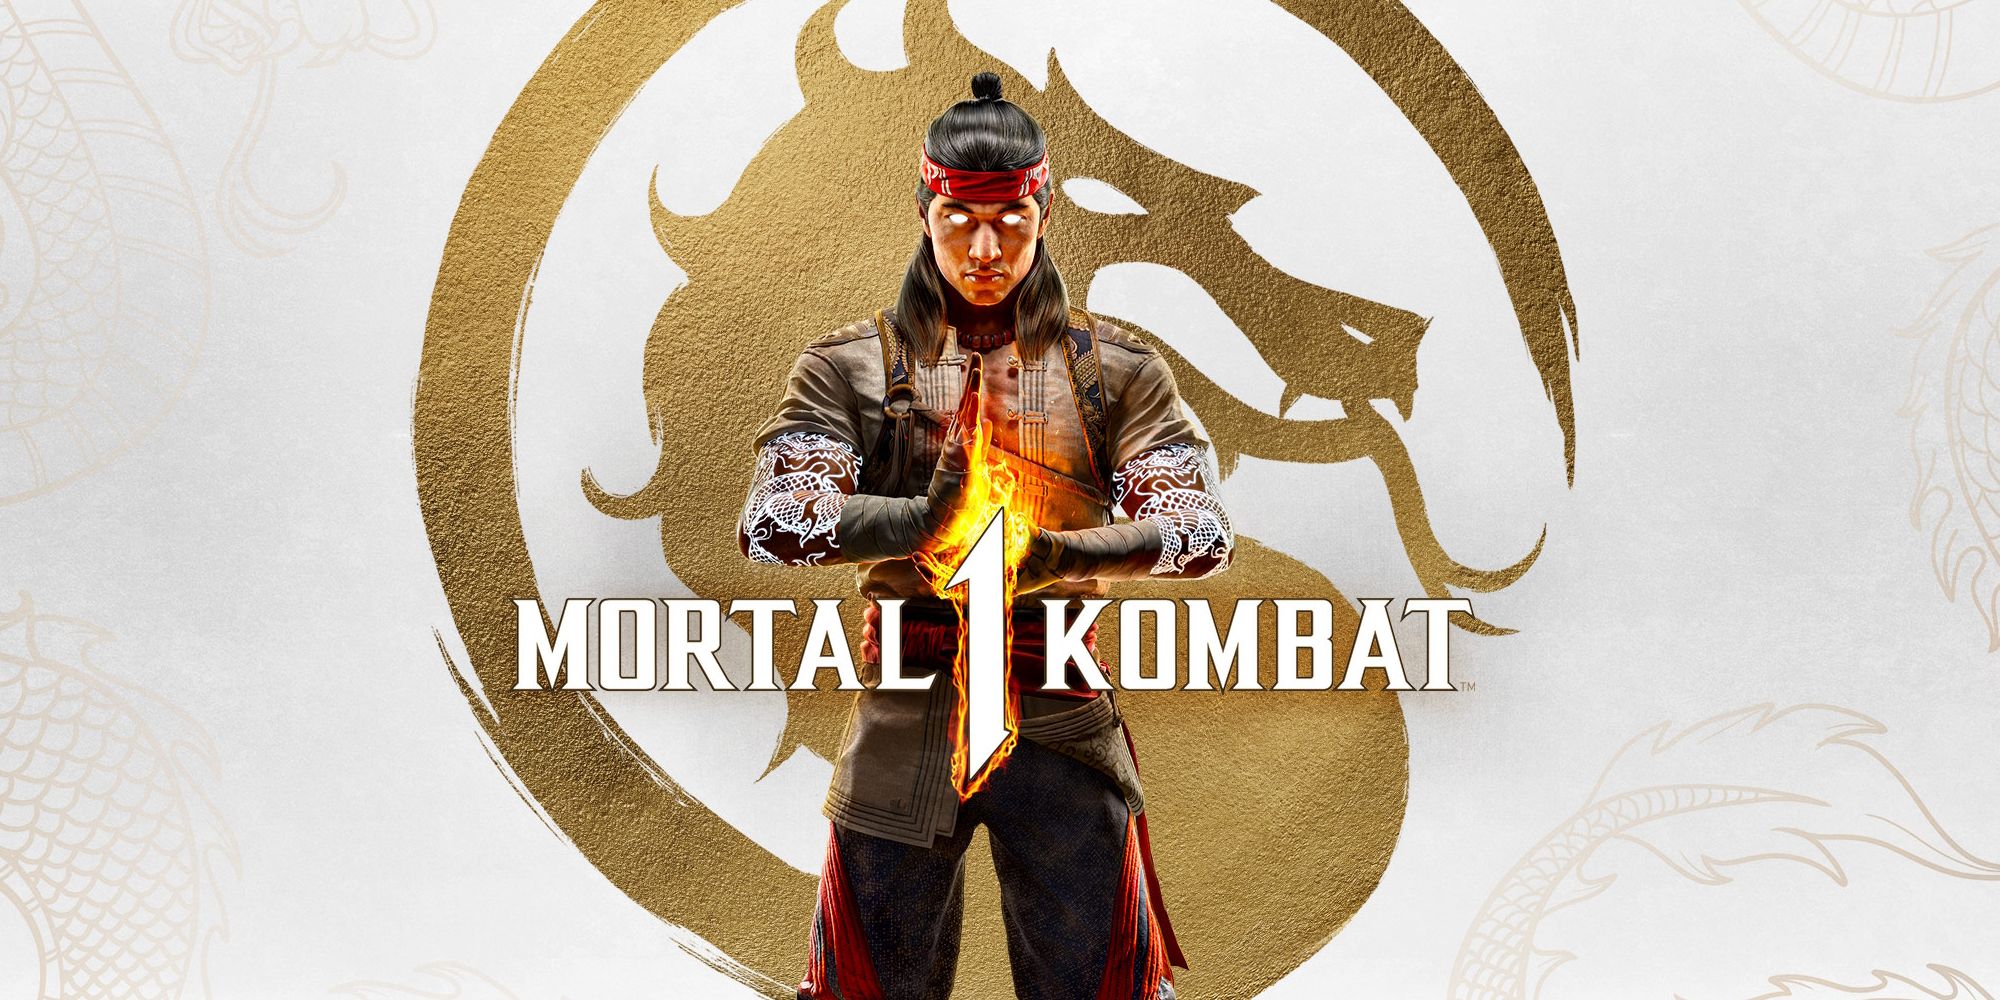 Who Are The Returning Old Characters in Mortal Kombat 1?